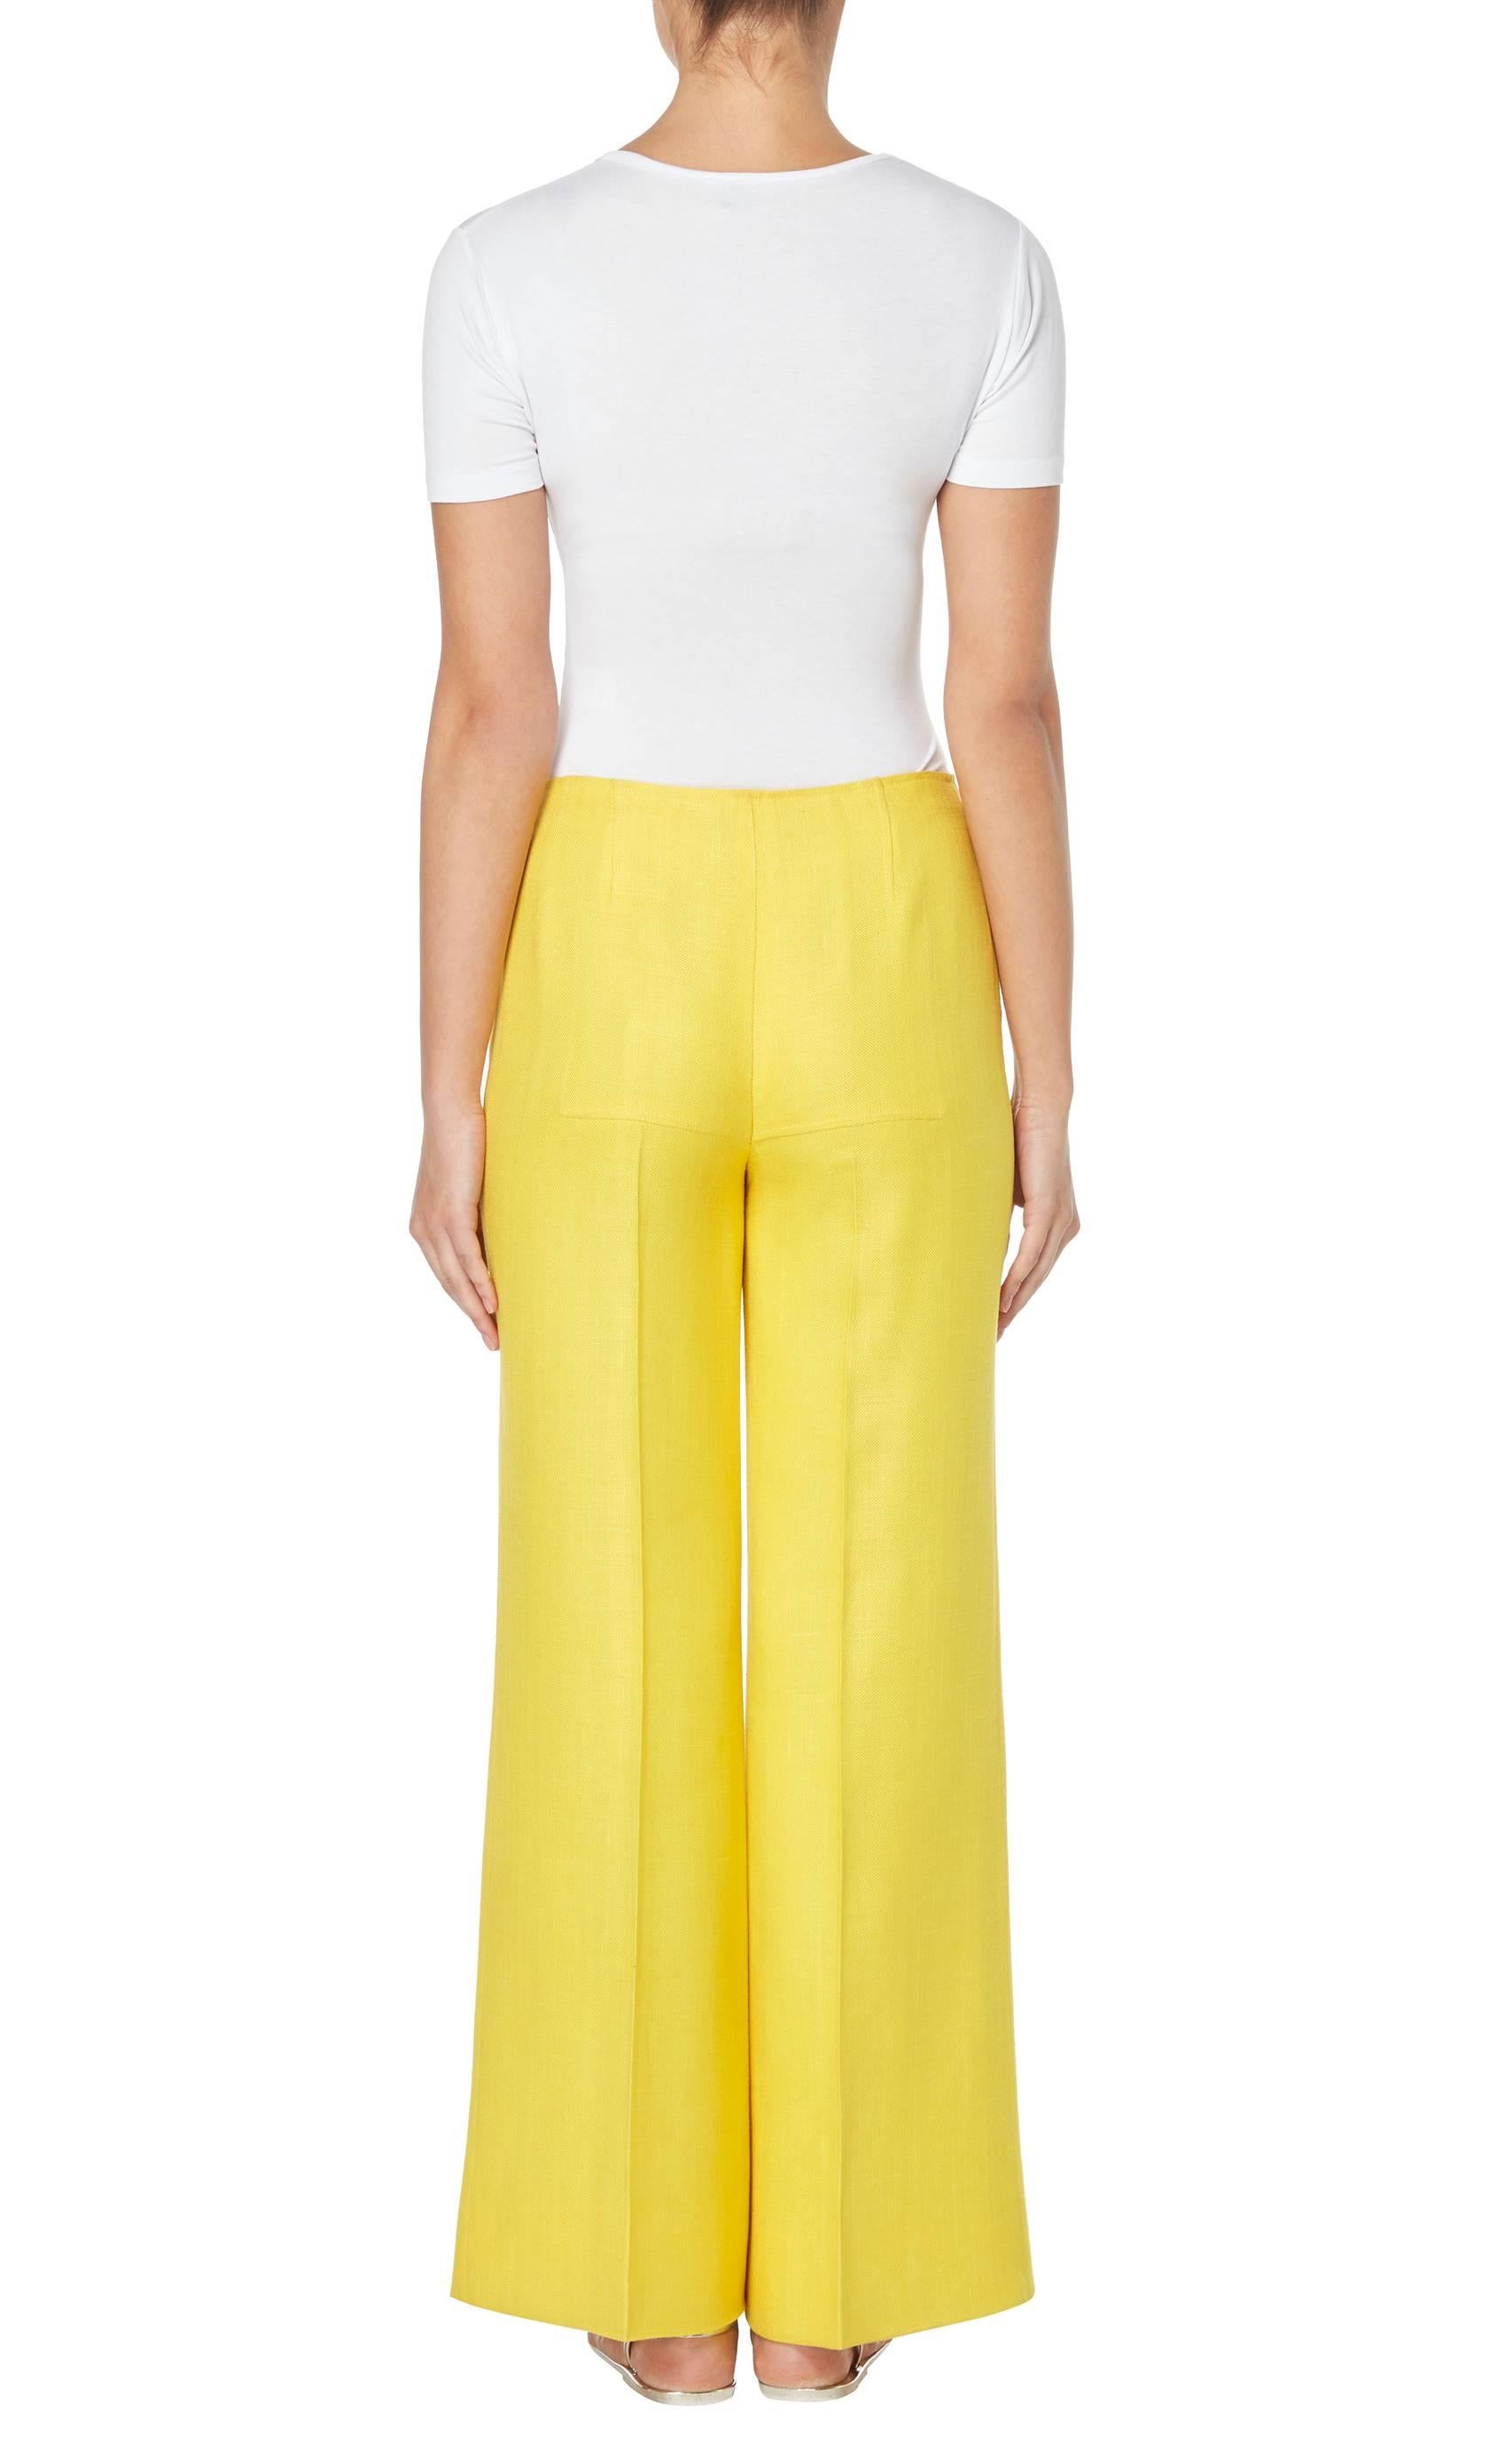 Yellow Courrèges yellow trousers, circa 1970